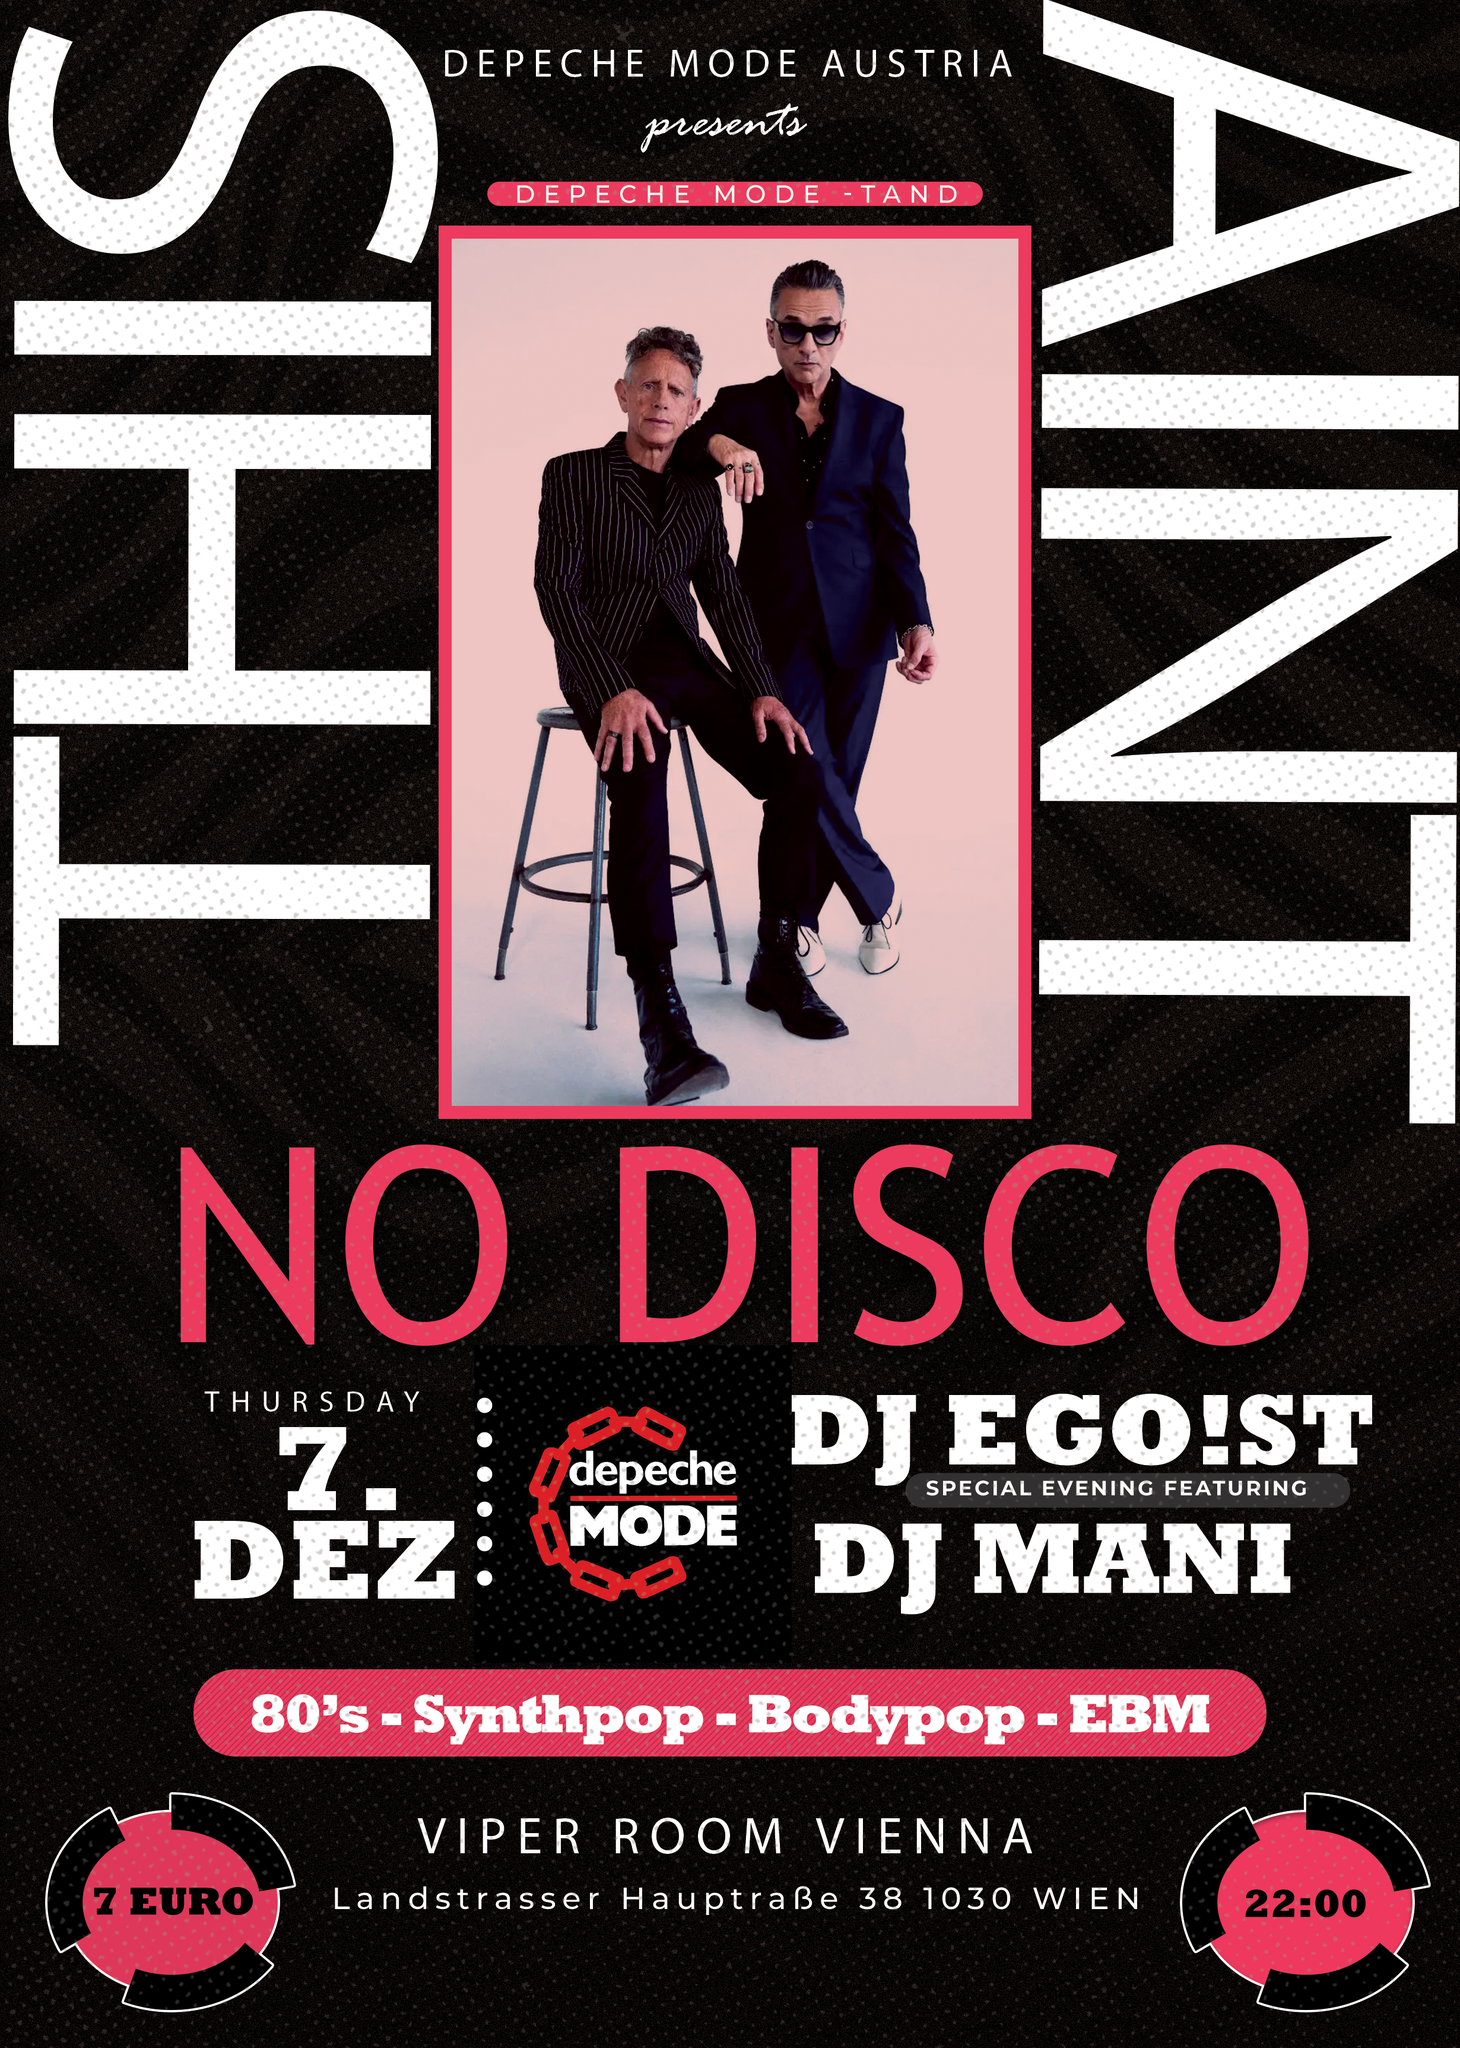 This ain't no Disco - Depeche Mode / 80s Party am 7. December 2023 @ Viper Room.